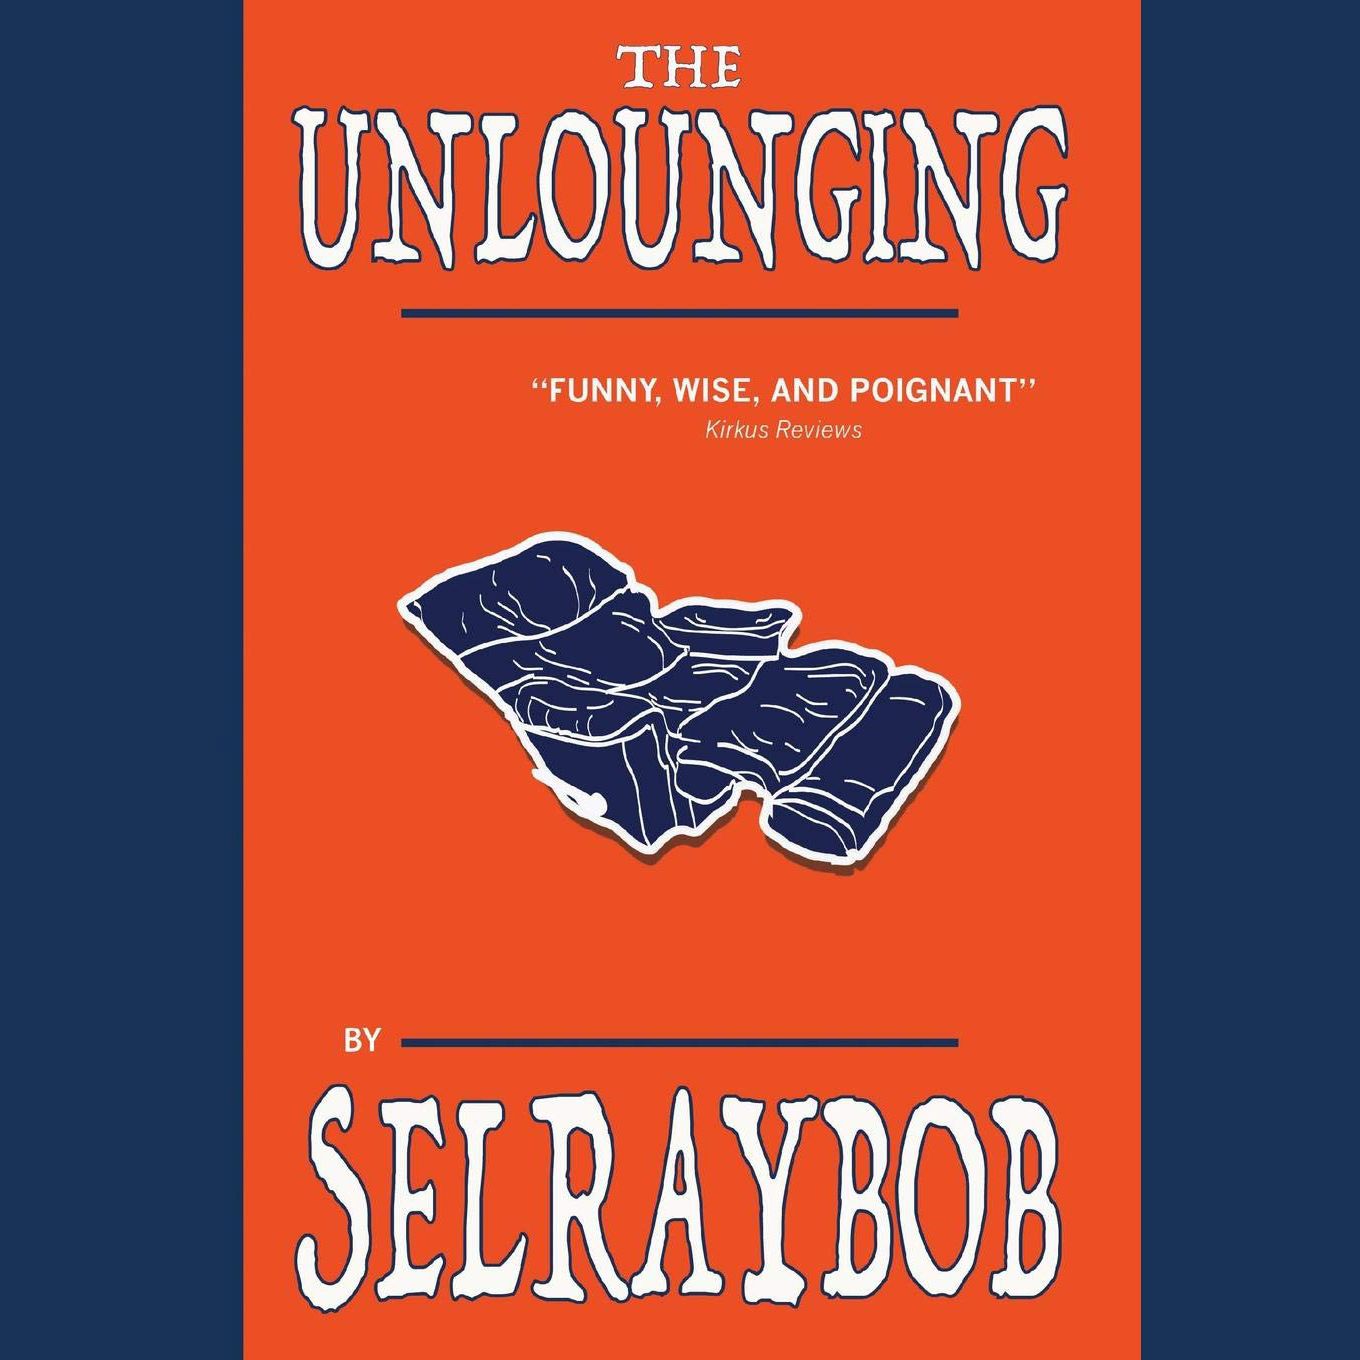 The Unlounging: From a Belly Full of Beer to a Craw Full of Time by Selraybob